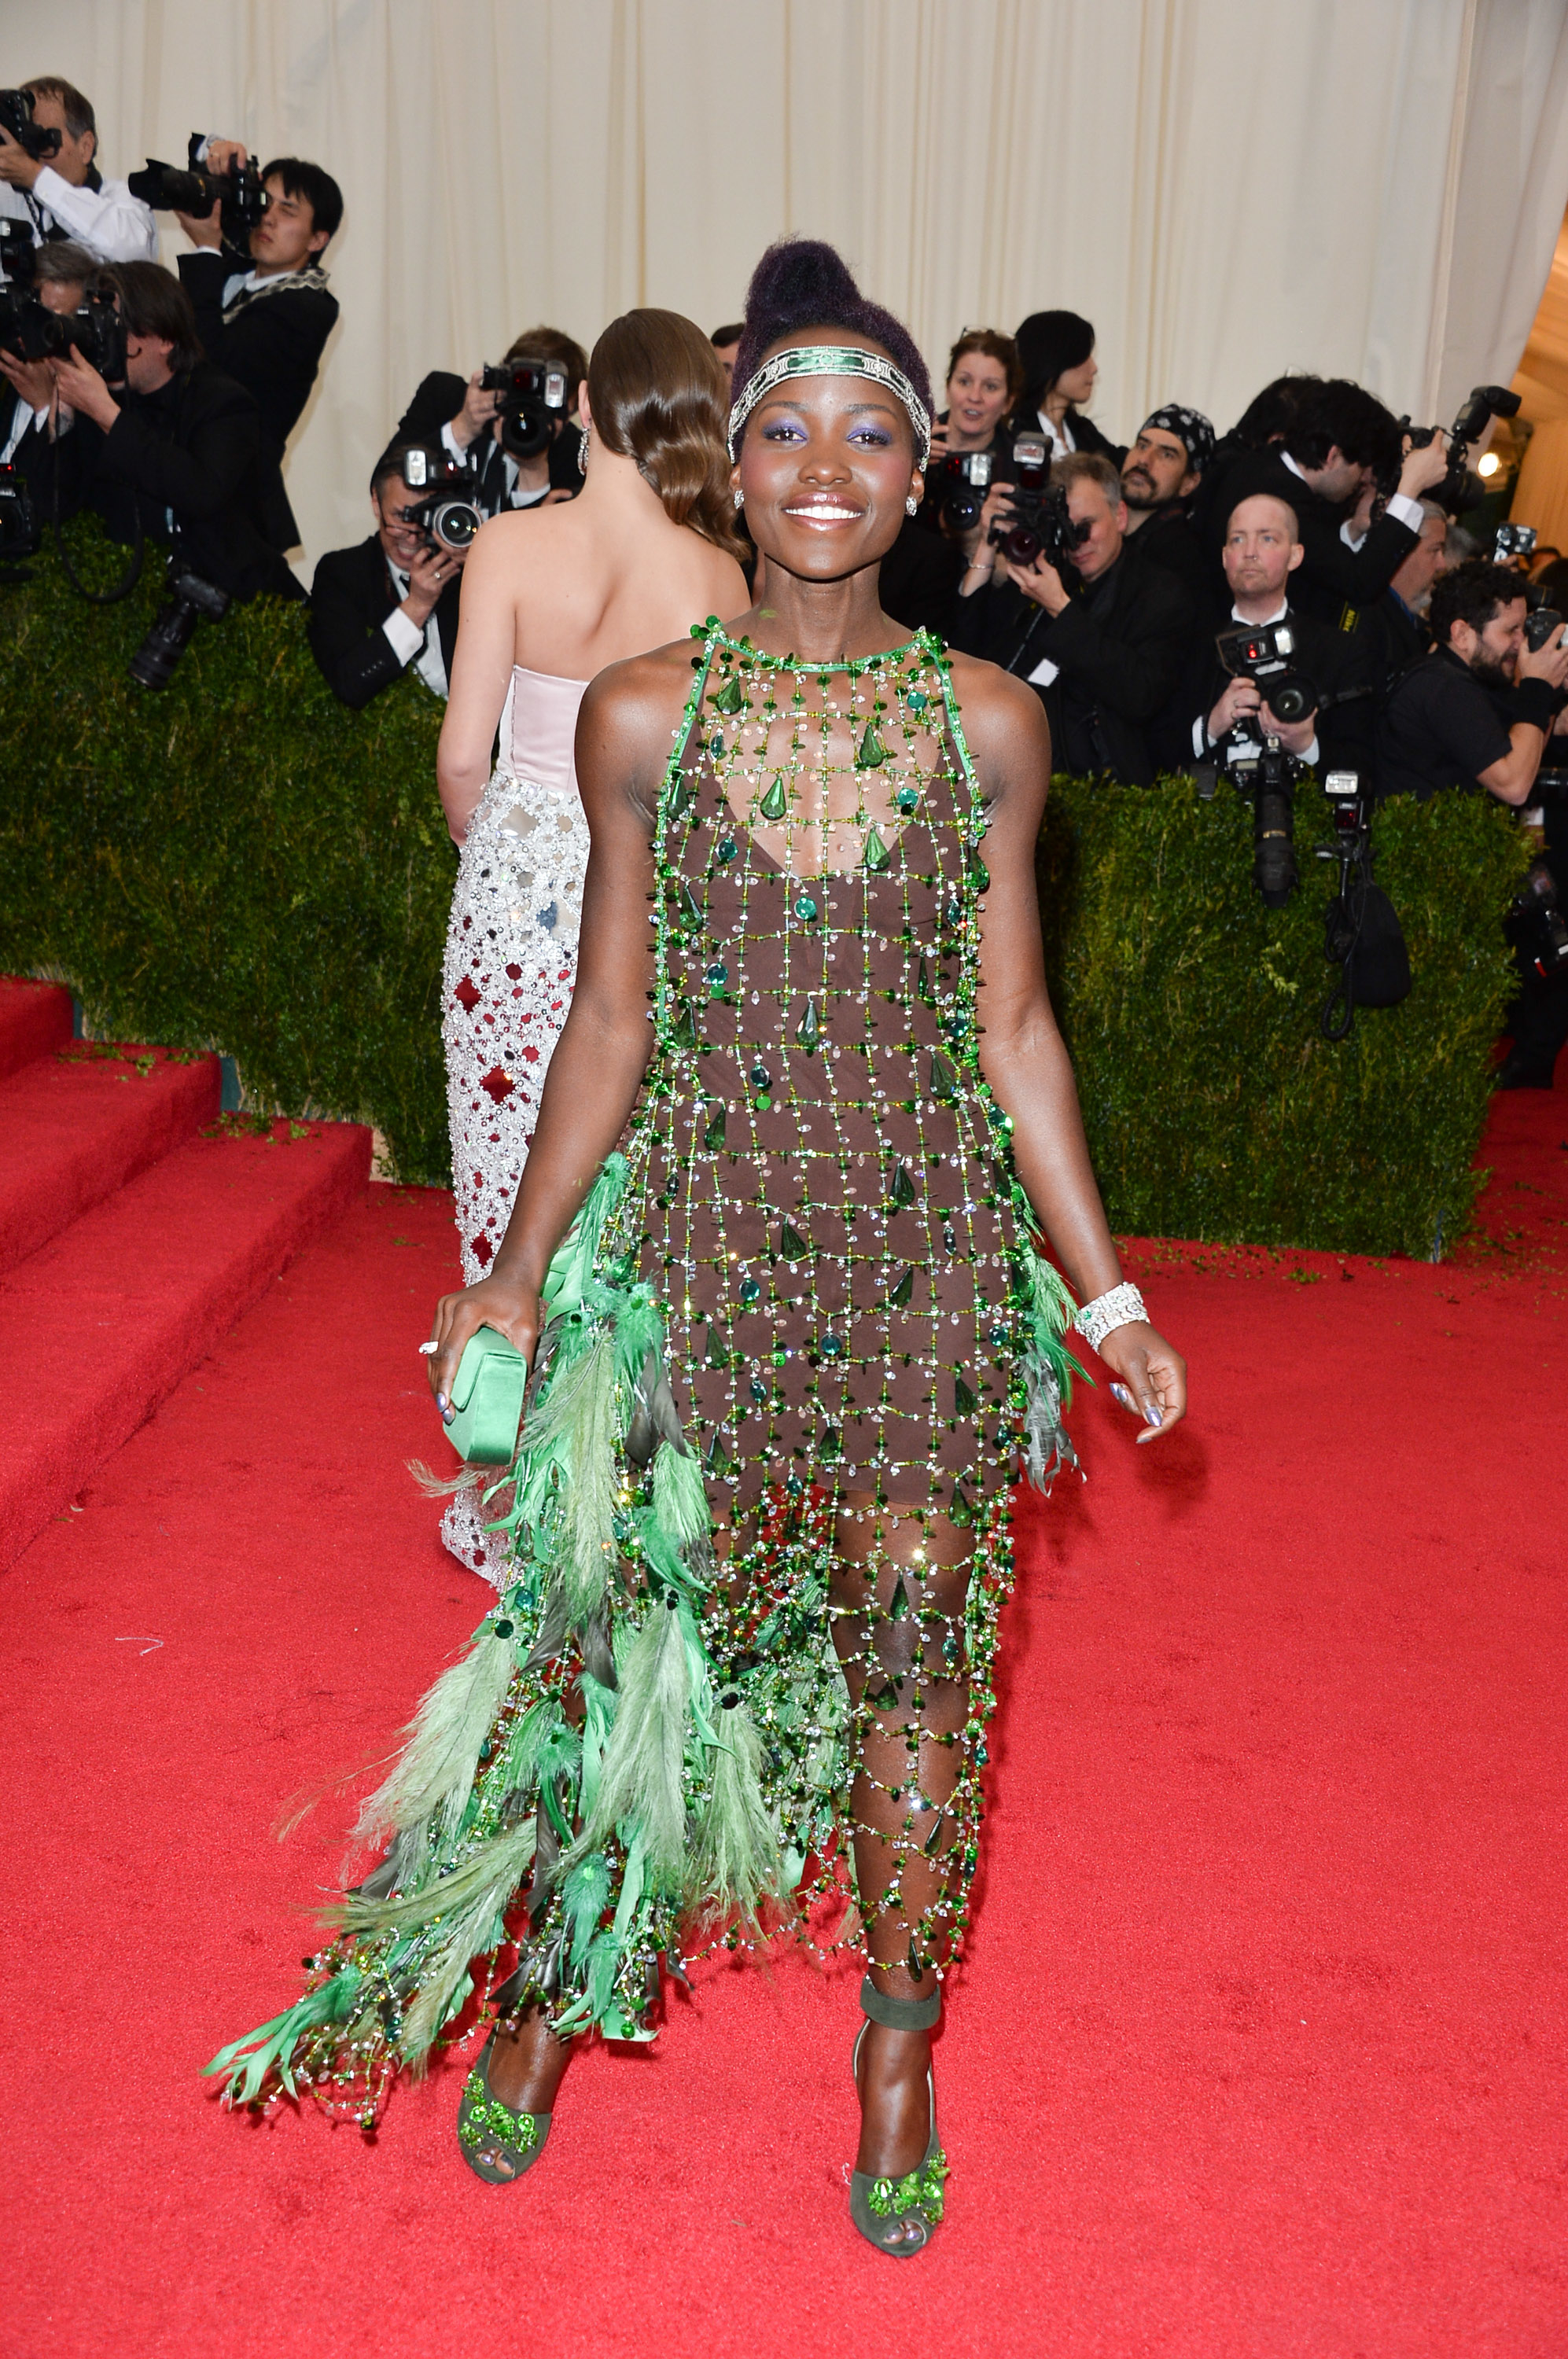 Lupita Nyong&#x27;o in a green beaded dress with feather details, standing on the red carpet with photographers in the background